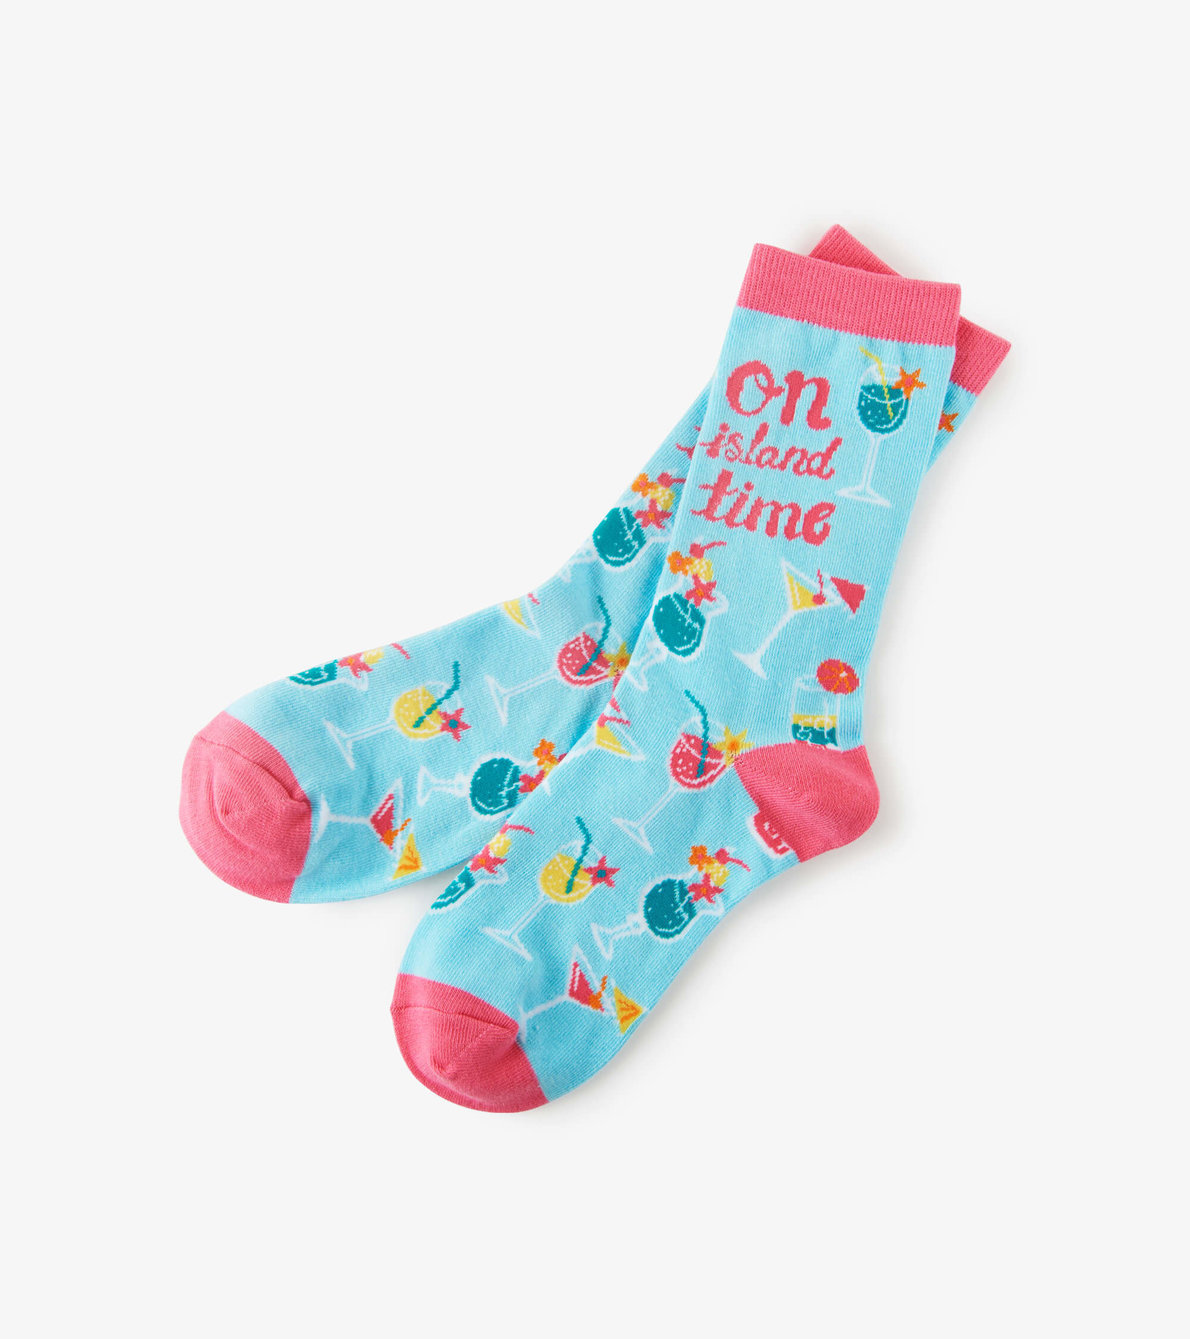 View larger image of On Island Time Women's Crew Socks